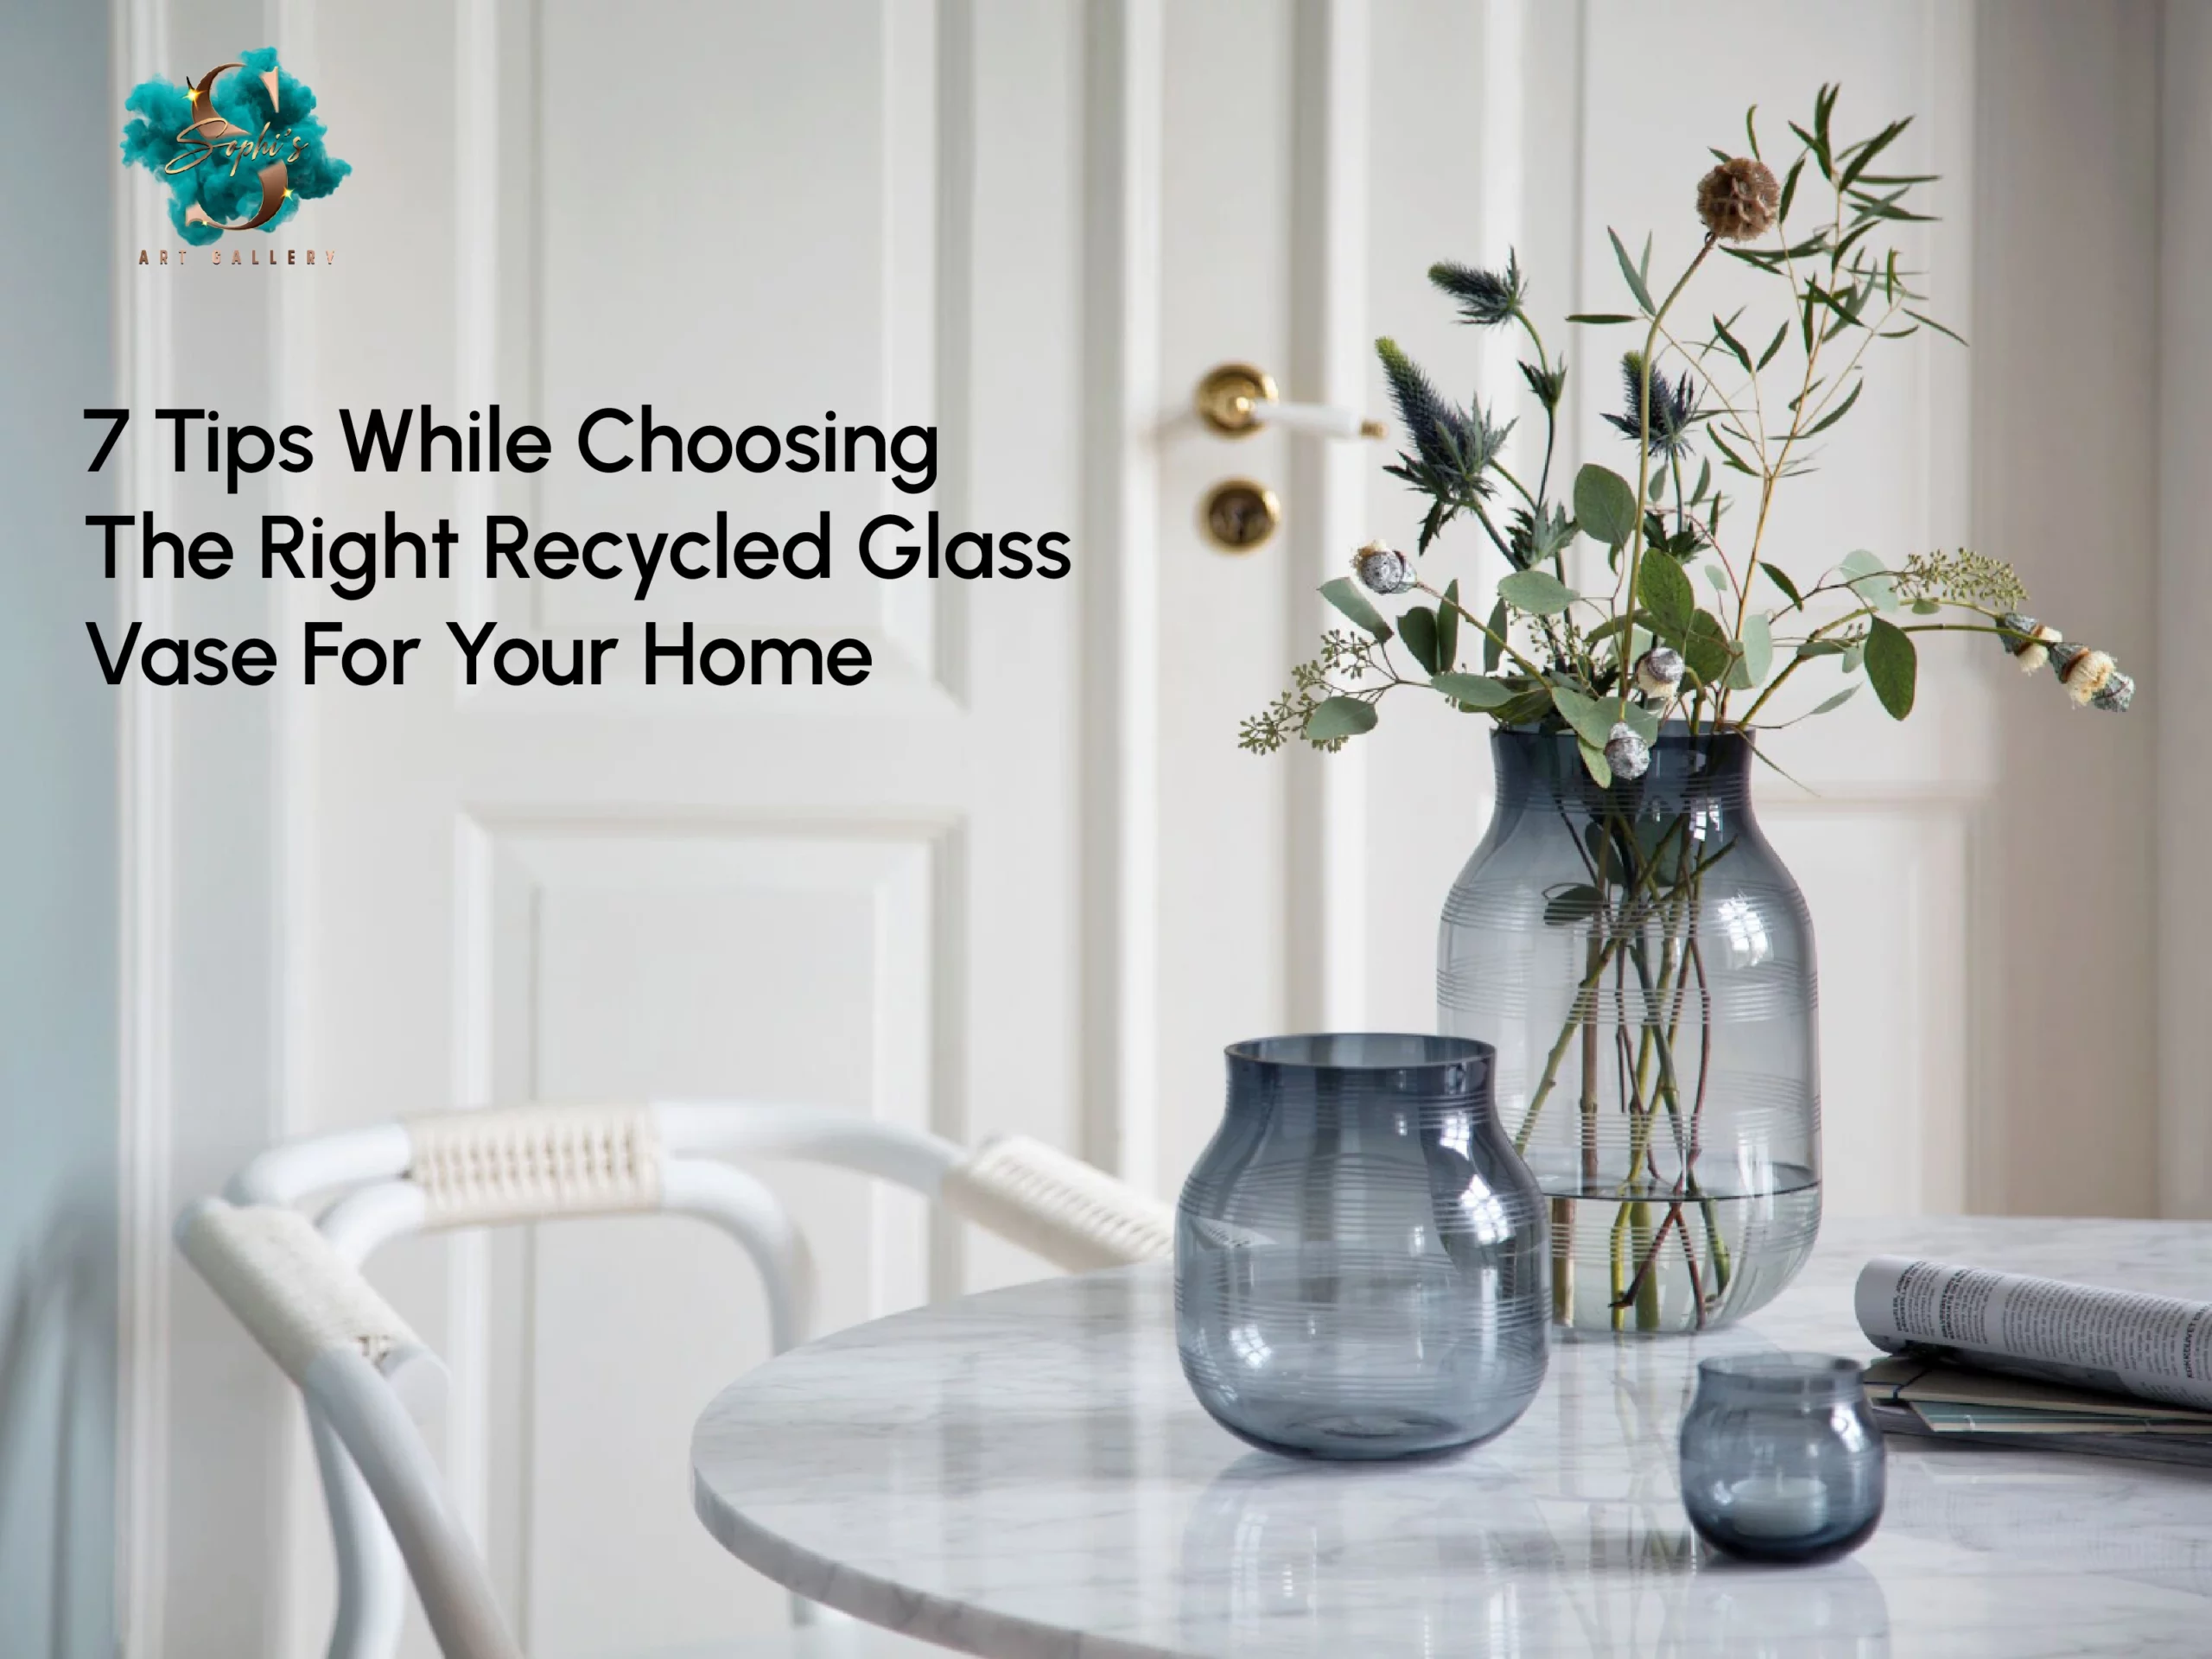 7 Tips While Choosing The Right Recycled Glass Vase For Your Home